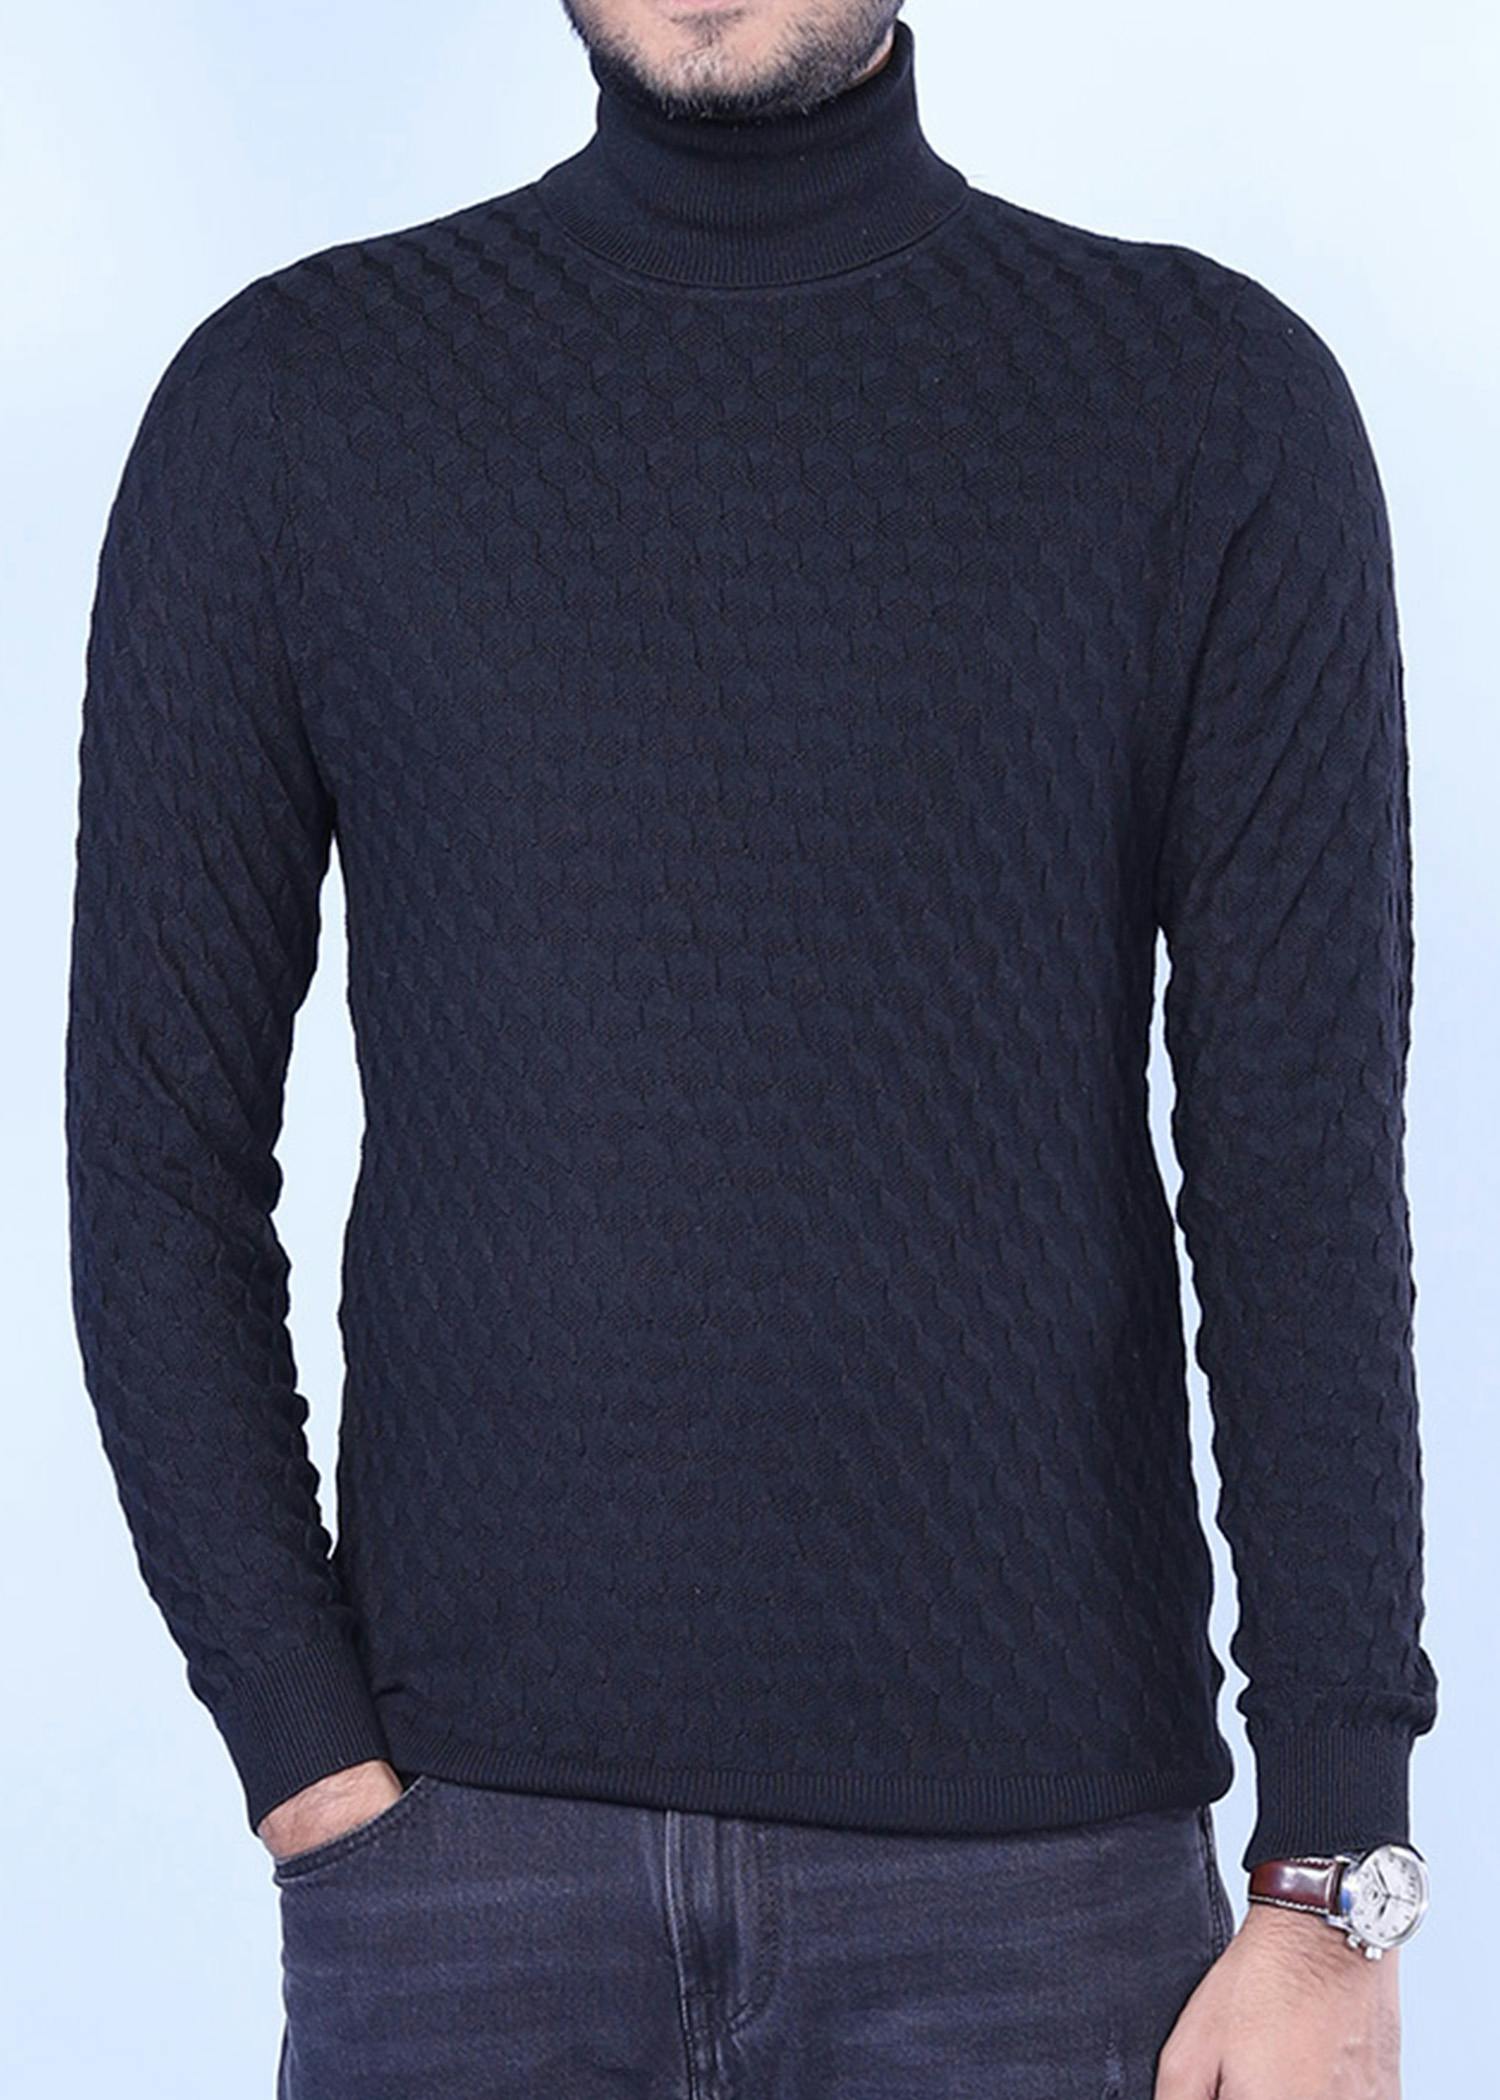 hornero ii sweater navy color headcropped